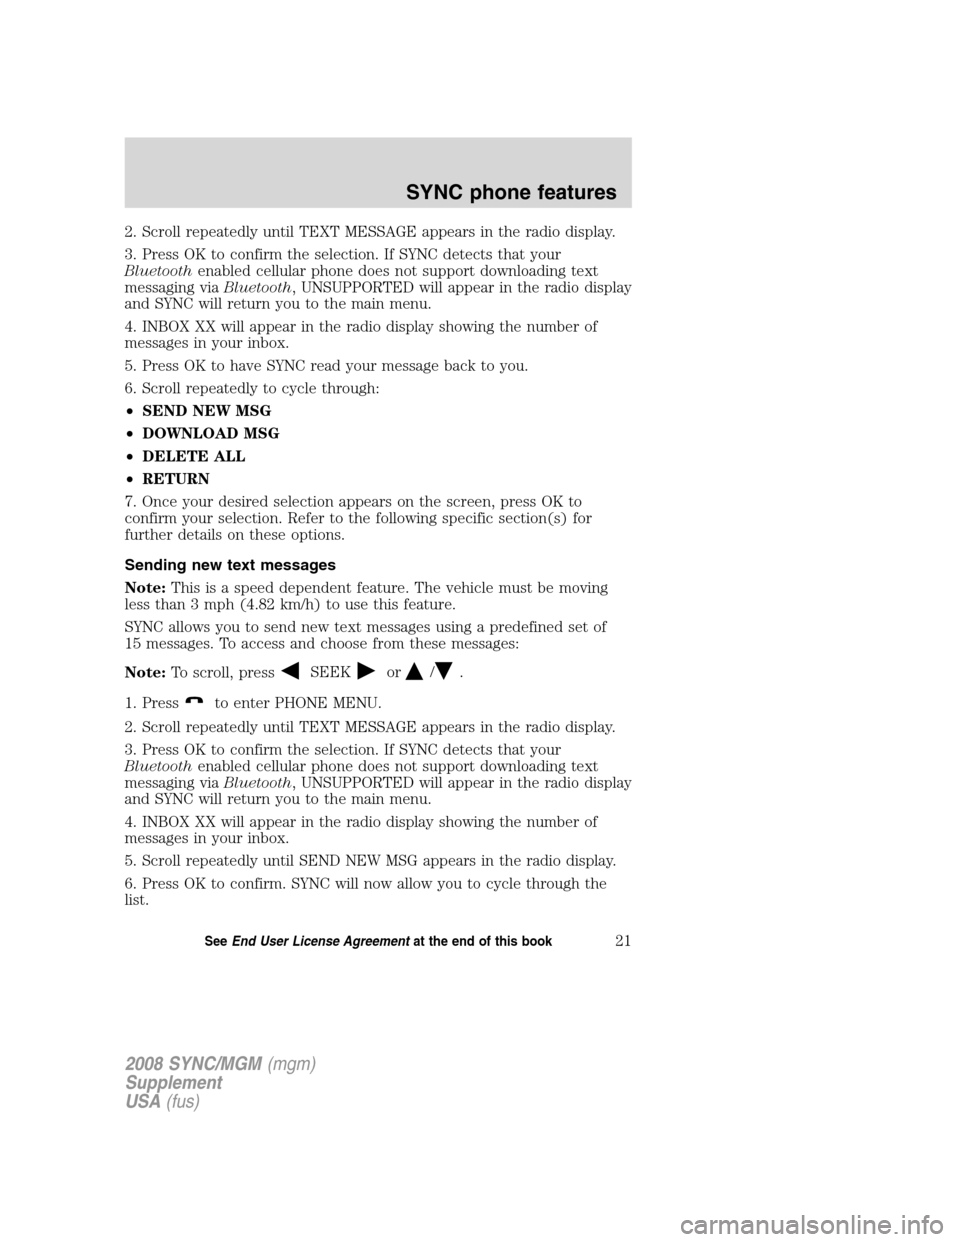 FORD ESCAPE 2008 2.G Quick Reference Guide 
2. Scroll repeatedly until TEXT MESSAGE appears in the radio display.
3. Press OK to confirm the selection. If SYNC detects that your
Bluetoothenabled cellular phone does not support downloading text